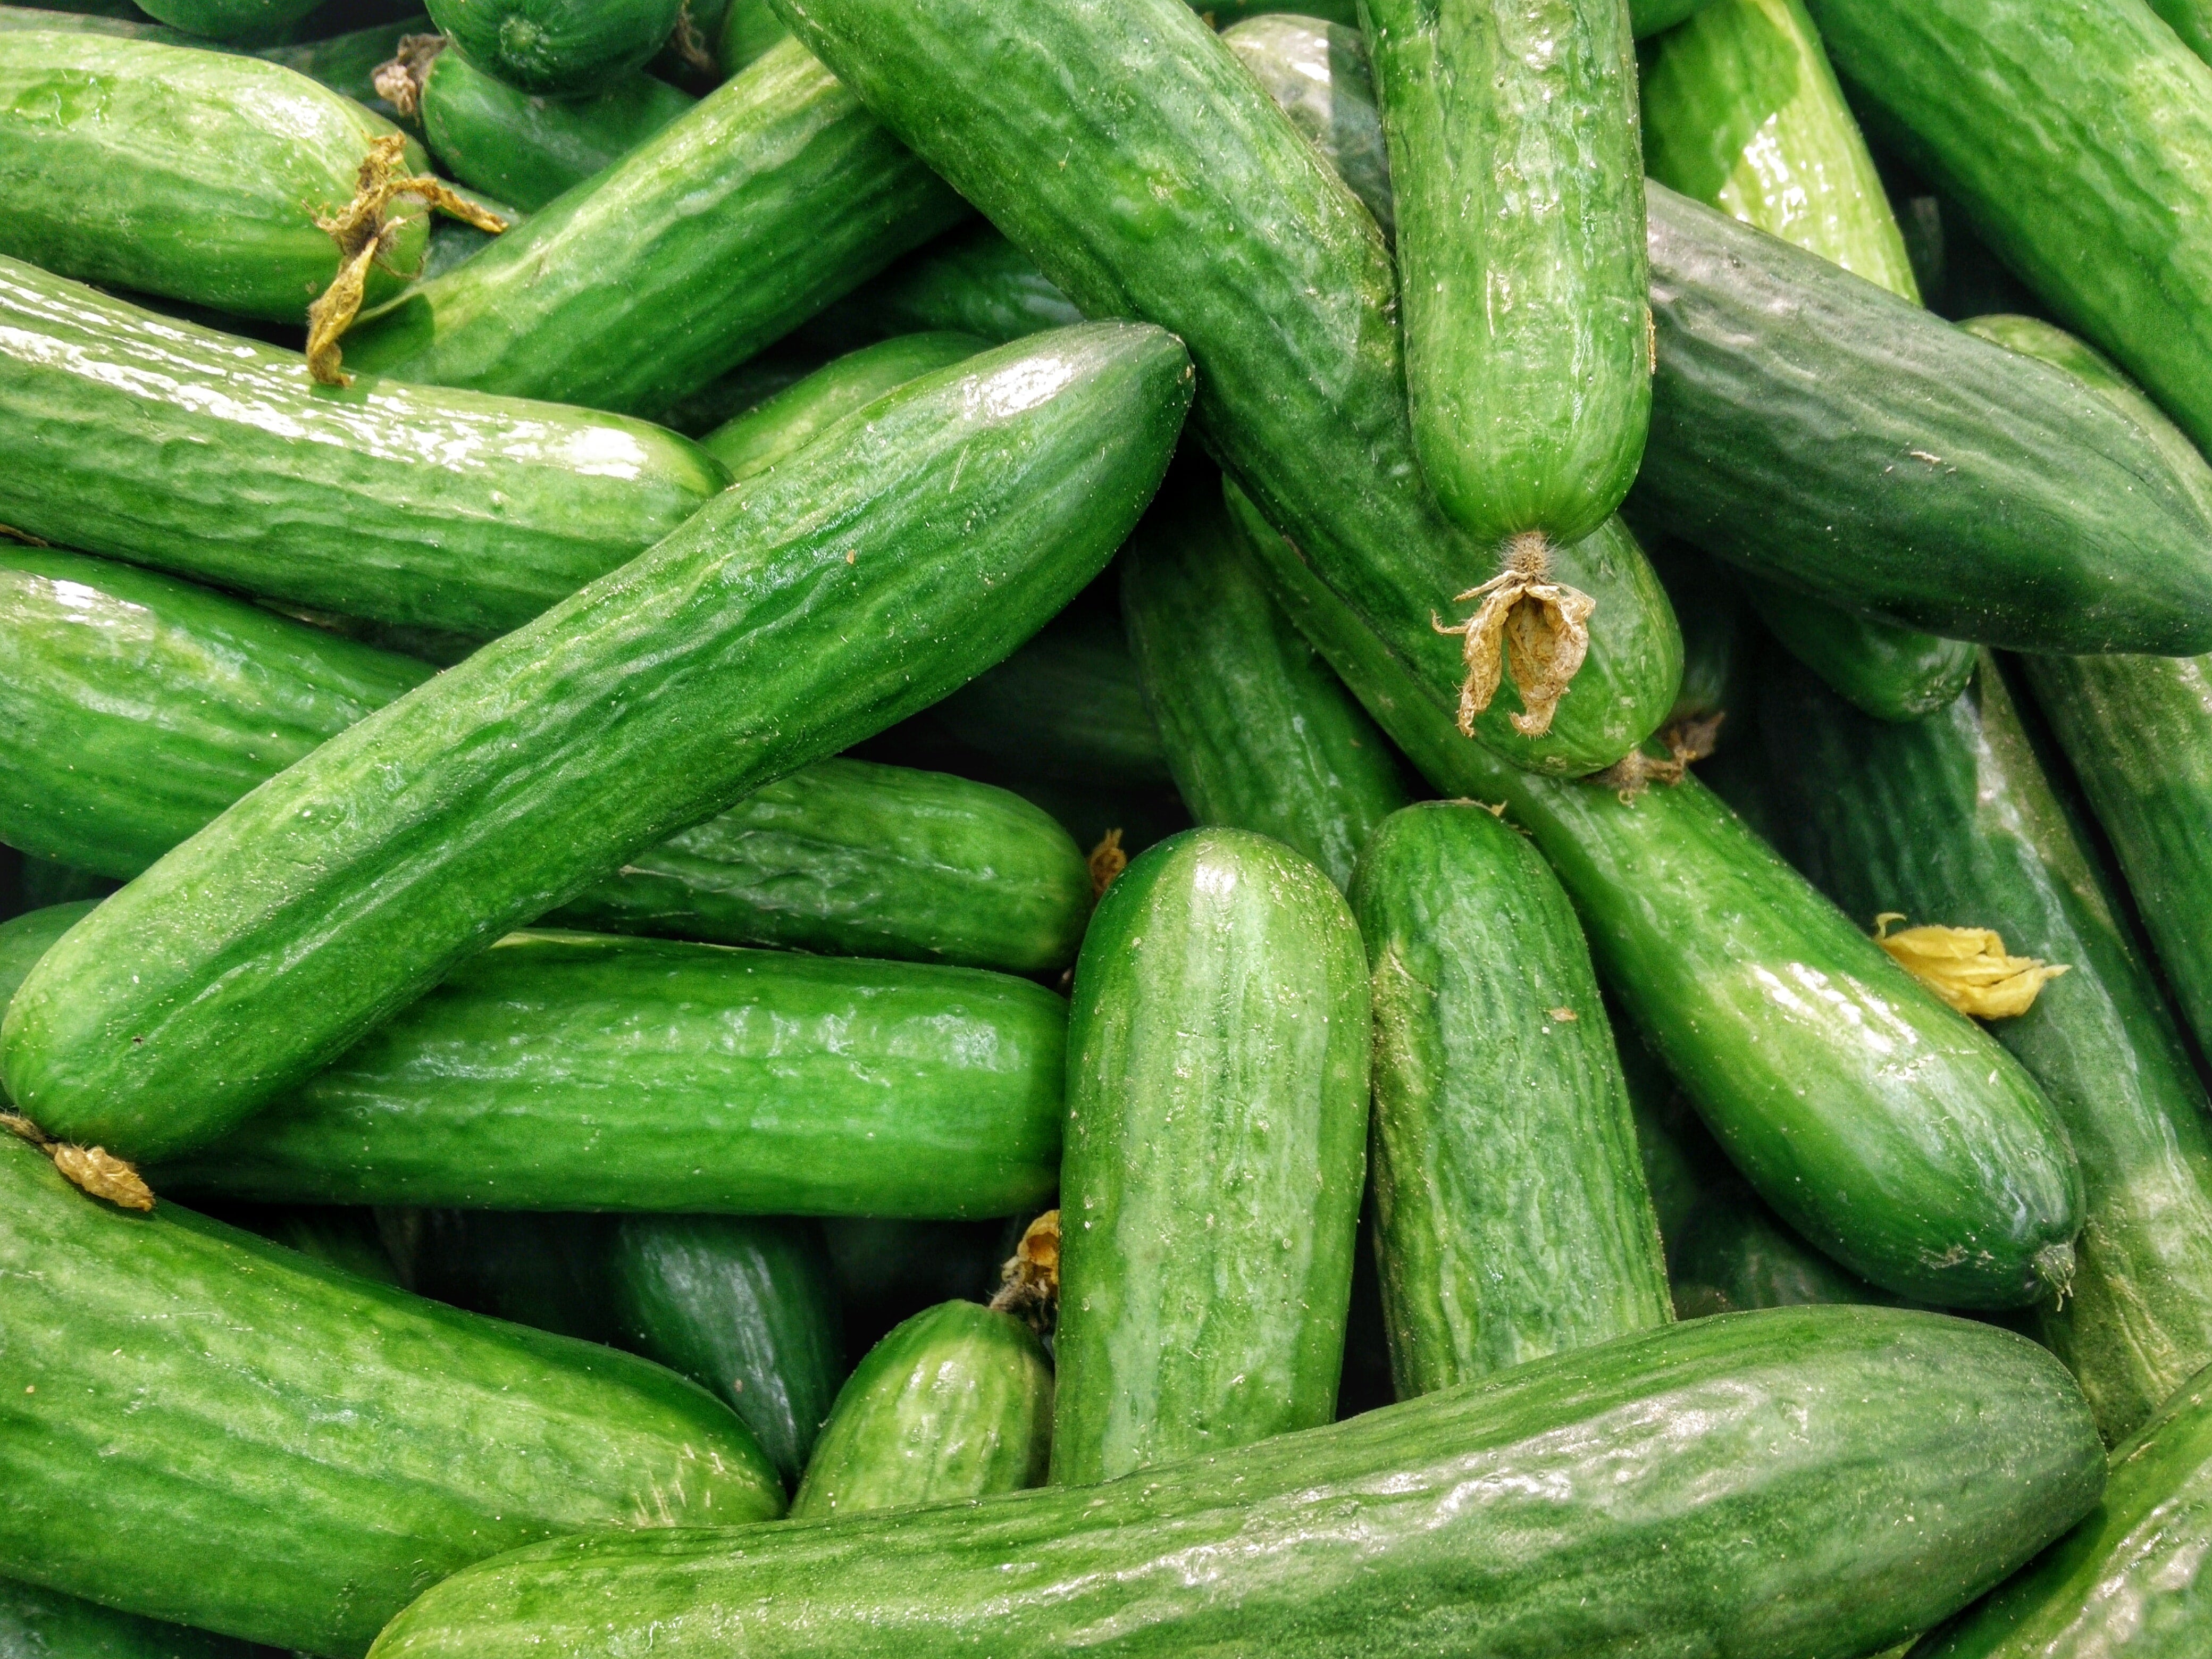 Gathered cucumbers that can be fed to guinea pigs